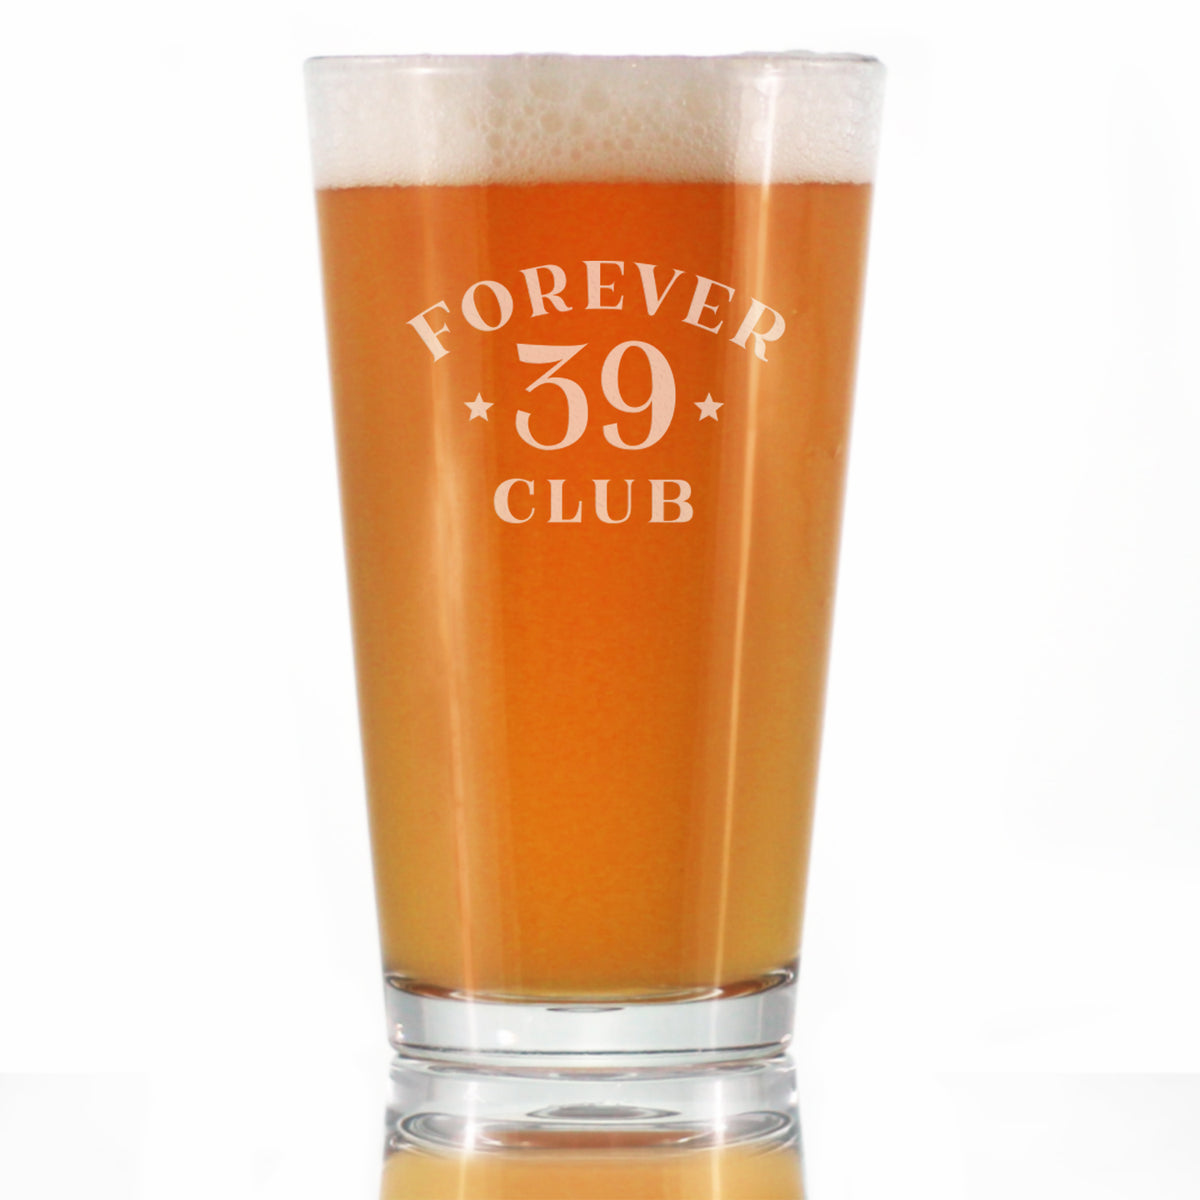 Forever 39 Club - Pint Glass for Beer 40th Birthday Gifts for Women &amp; Men Turning 40 - Fun Bday Party Decor - 16 Oz